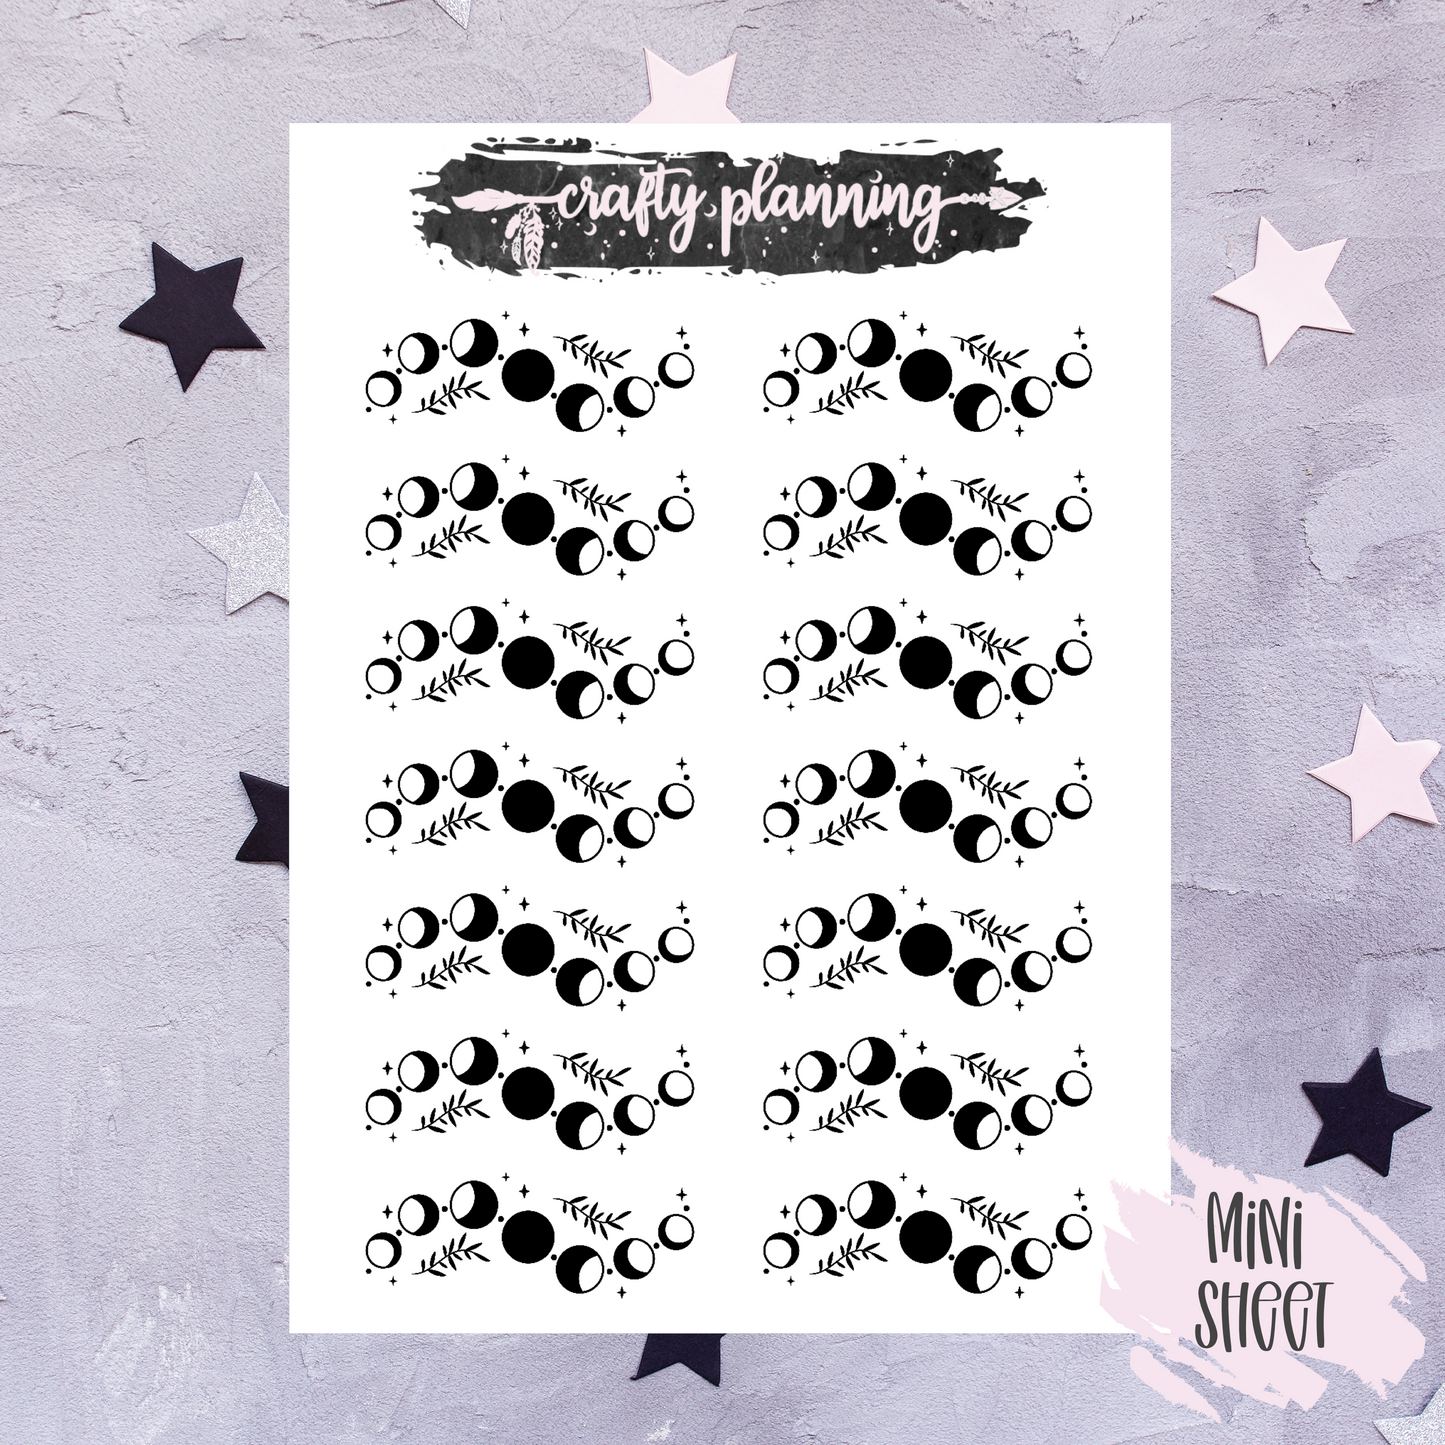 Moon Phase Stickers, Gothic Stickers, Goth Stickers, Black and White Stickers, Dark & Moody, Planner Stickers